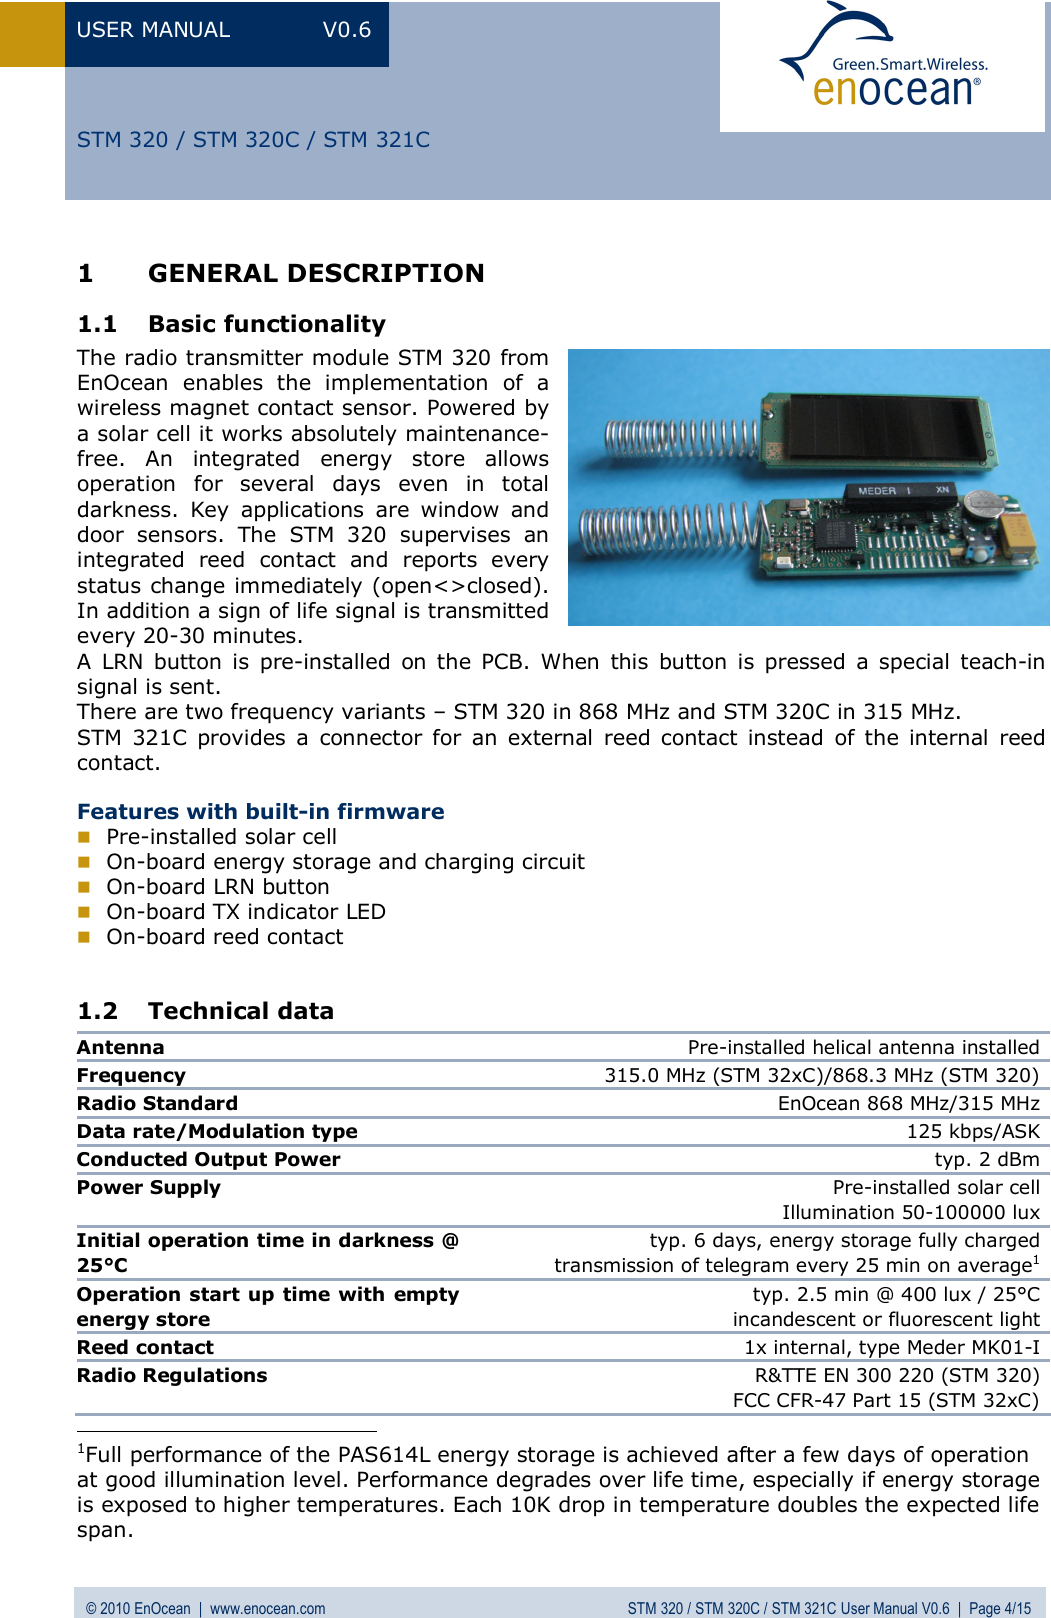 USER MANUAL V0.6 © 2010 EnOcean  |  www.enocean.com STM 320 / STM 320C / STM 321C User Manual V0.6  |  Page 4/15  STM 320 / STM 320C / STM 321C 1 GENERAL DESCRIPTION 1.1 Basic functionality The radio transmitter module STM 320 from EnOcean enables the implementation of a wireless magnet contact sensor. Powered by a solar cell it works absolutely maintenance-free. An integrated energy store allows operation for several days even in total darkness. Key applications are window and door sensors. The STM 320 supervises an integrated reed contact and reports every status change immediately (open&lt;&gt;closed). In addition a sign of life signal is transmitted every 20-30 minutes.  A LRN button is pre-installed on the PCB. When this button is pressed a special teach-in signal is sent. There are two frequency variants – STM 320 in 868 MHz and STM 320C in 315 MHz. STM 321C provides a connector for an external reed contact instead of the internal reed contact.  Features with built-in firmware  Pre-installed solar cell   On-board energy storage and charging circuit  On-board LRN button   On-board TX indicator LED  On-board reed contact  1.2 Technical data Antenna  Pre-installed helical antenna installed Frequency   315.0 MHz (STM 32xC)/868.3 MHz (STM 320)Radio Standard   EnOcean 868 MHz/315 MHzData rate/Modulation type  125 kbps/ASKConducted Output Power  typ. 2 dBmPower Supply  Pre-installed solar cellIllumination 50-100000 luxInitial operation time in darkness @ 25°C  typ. 6 days, energy storage fully charged transmission of telegram every 25 min on average1Operation start up time with empty energy store  typ. 2.5 min @ 400 lux / 25°C  incandescent or fluorescent lightReed contact  1x internal, type Meder MK01-IRadio Regulations  R&amp;TTE EN 300 220 (STM 320)FCC CFR-47 Part 15 (STM 32xC)                                           1Full performance of the PAS614L energy storage is achieved after a few days of operation at good illumination level. Performance degrades over life time, especially if energy storage is exposed to higher temperatures. Each 10K drop in temperature doubles the expected life span. 